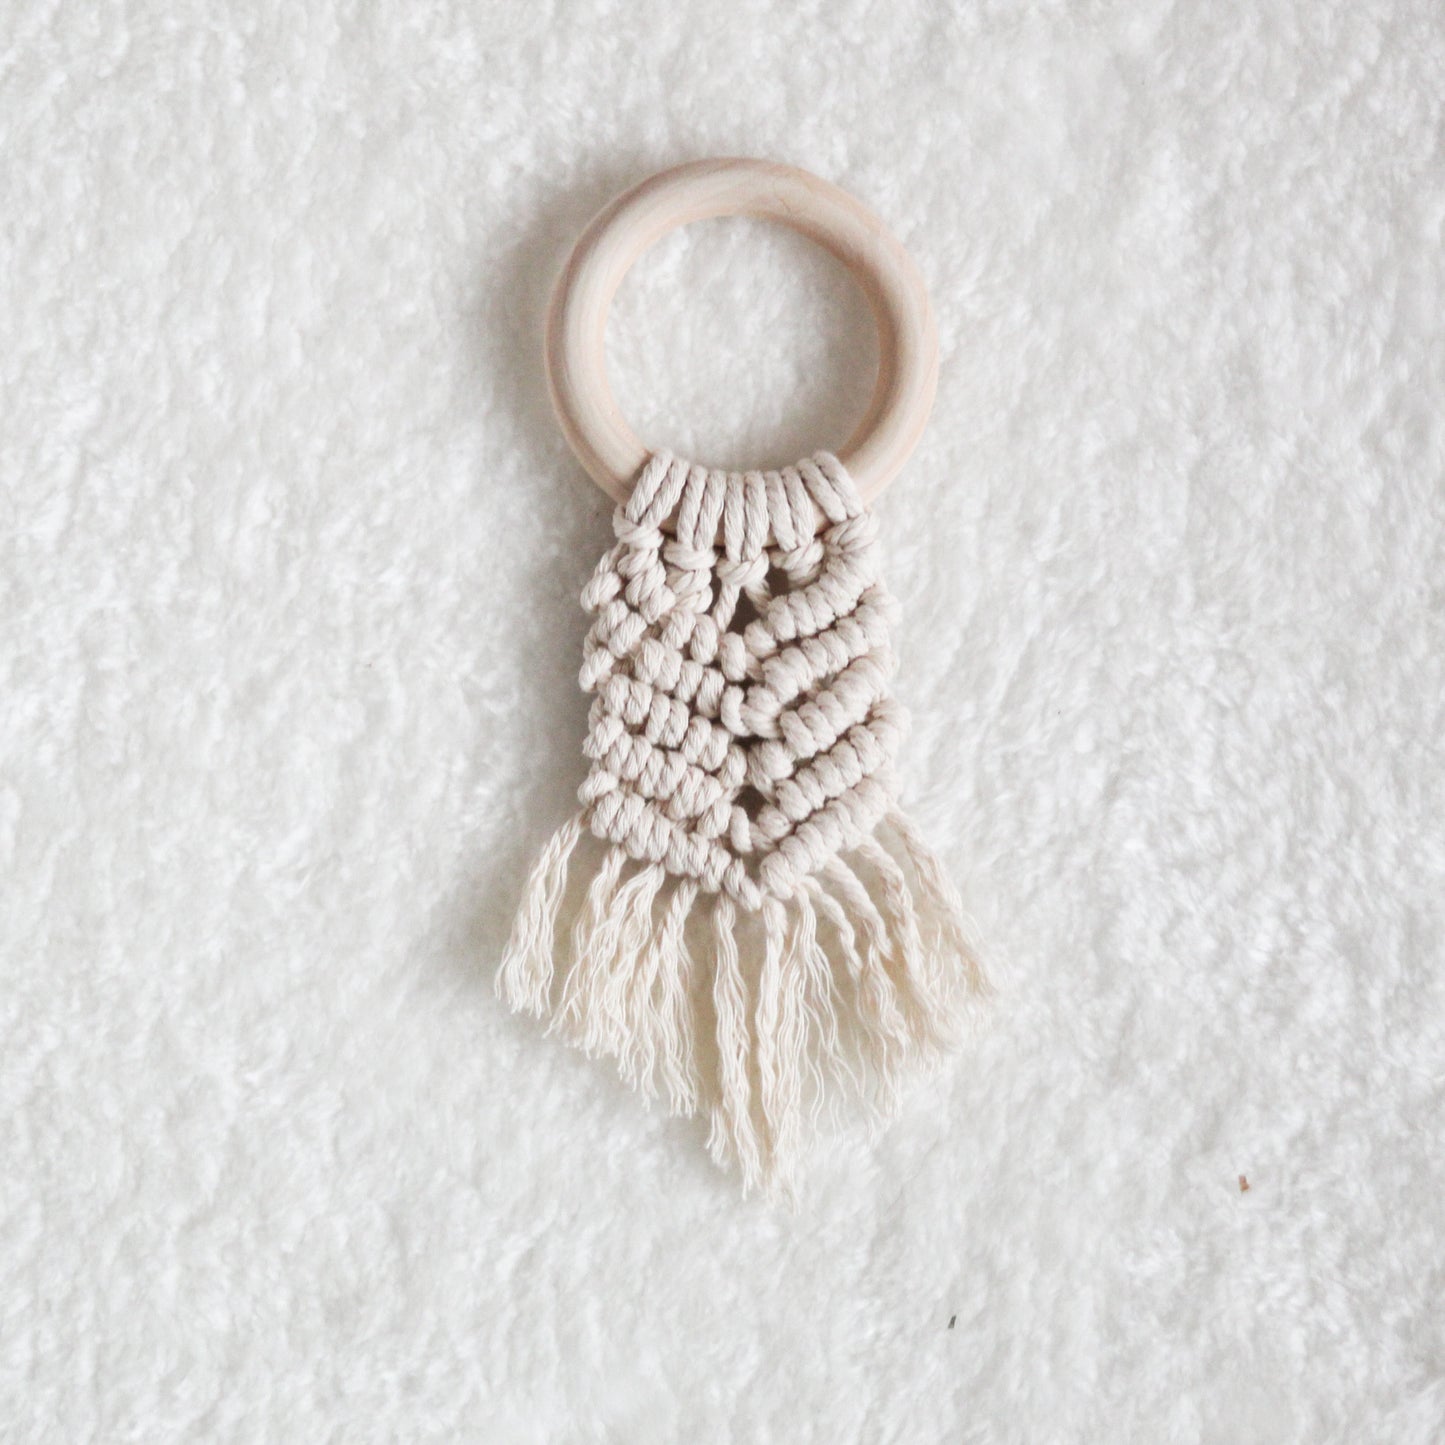 Biting toy with macrame | Tree ring